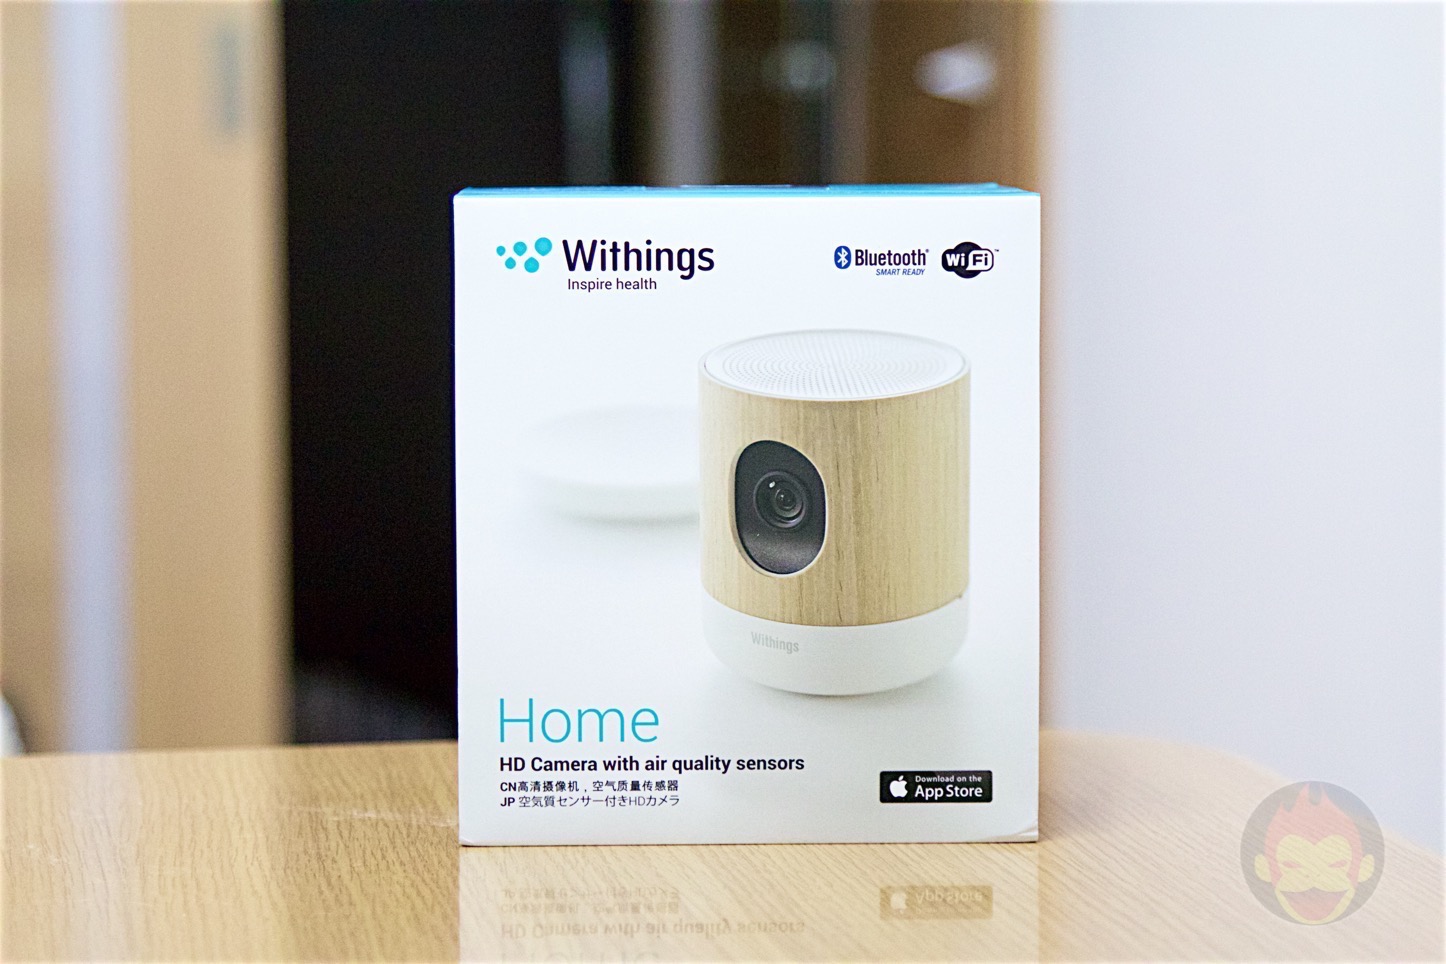 Withings-Home-Camera-for-checking-pets-and-babies-08.jpg